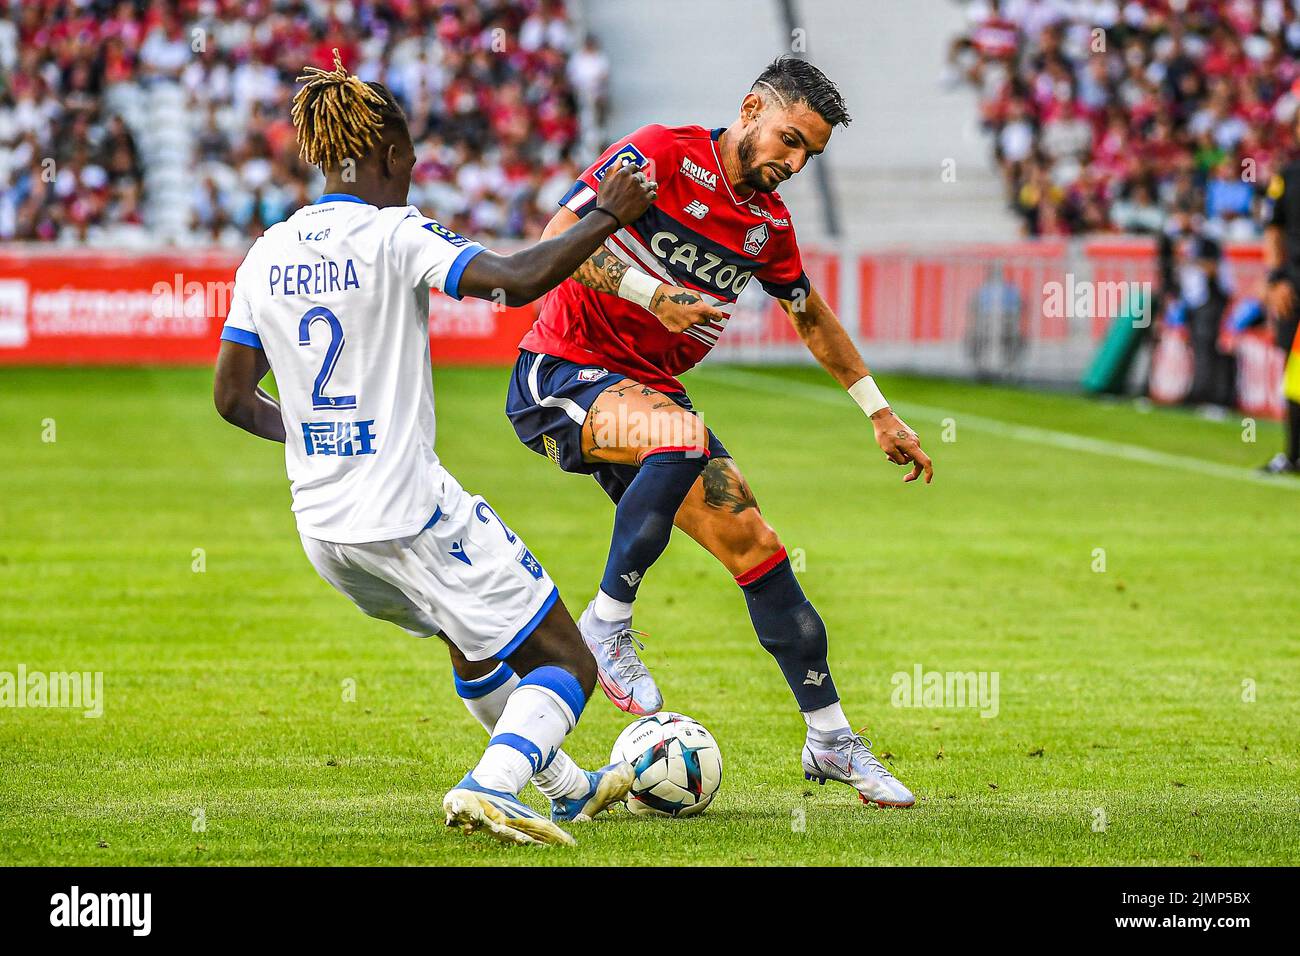 LILLE, FRANCE - AUGUST 7: Brayann Pereira of Auxerre, Remy Cabella of Lille during the French Ligue 1 match between Lille and Auxerre at Stade Pierre Mauroy on August 7, 2022 in Lille, France (Photo by Matthieu Mirville/Orange Pictures) Stock Photo